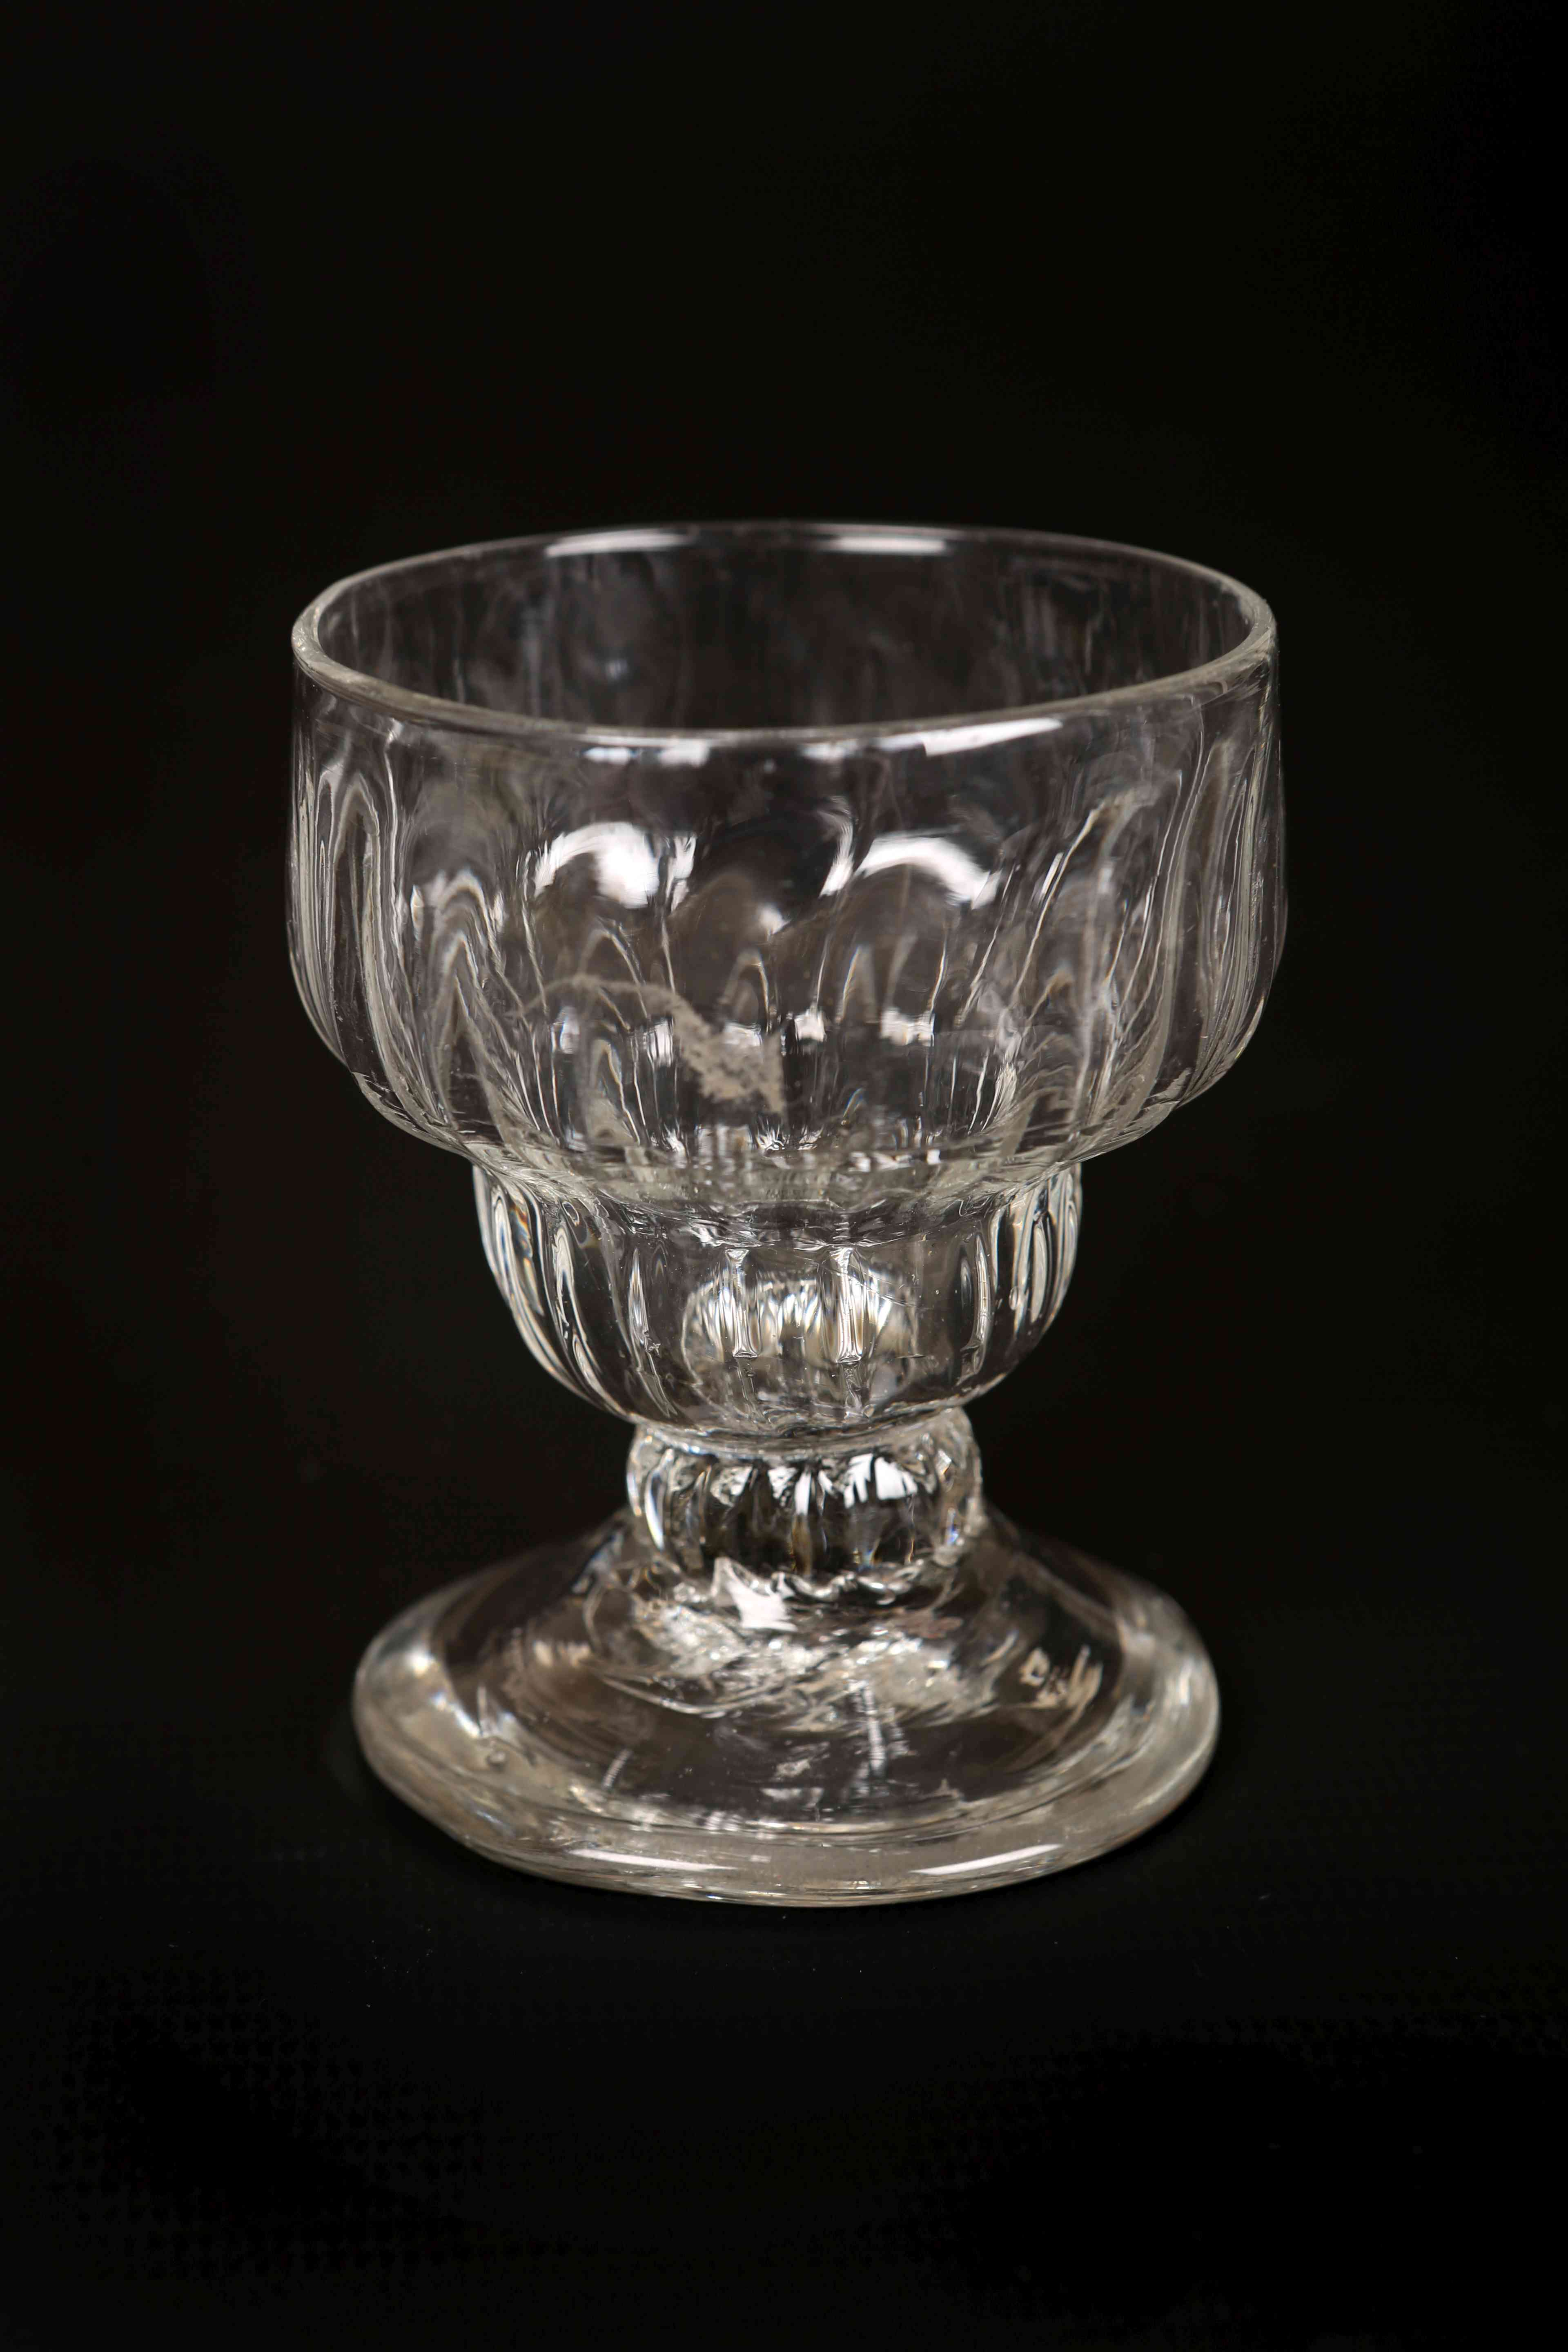 A MASONIC FIRING GLASS, 19TH CENTURY, engraved with emblems and a monogram, - Image 2 of 3